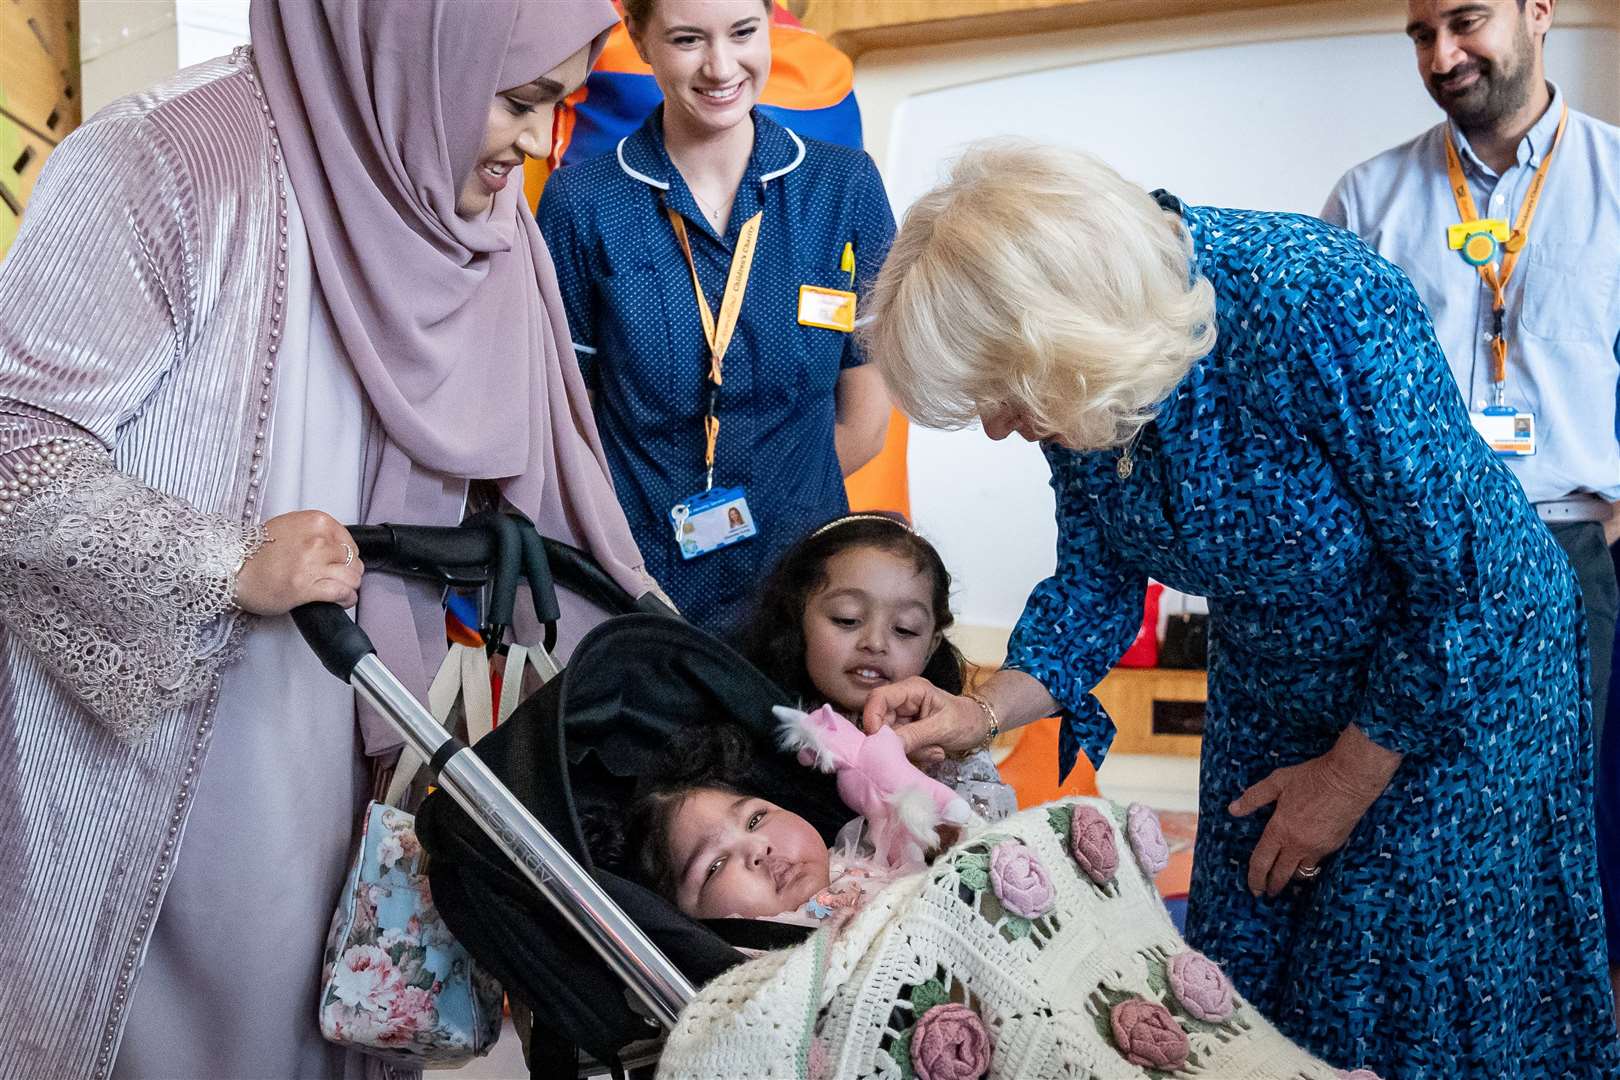 The Queen meets families helped by Roald Dahl’s Marvellous Children’s Charity (Aaron Chown/PA)